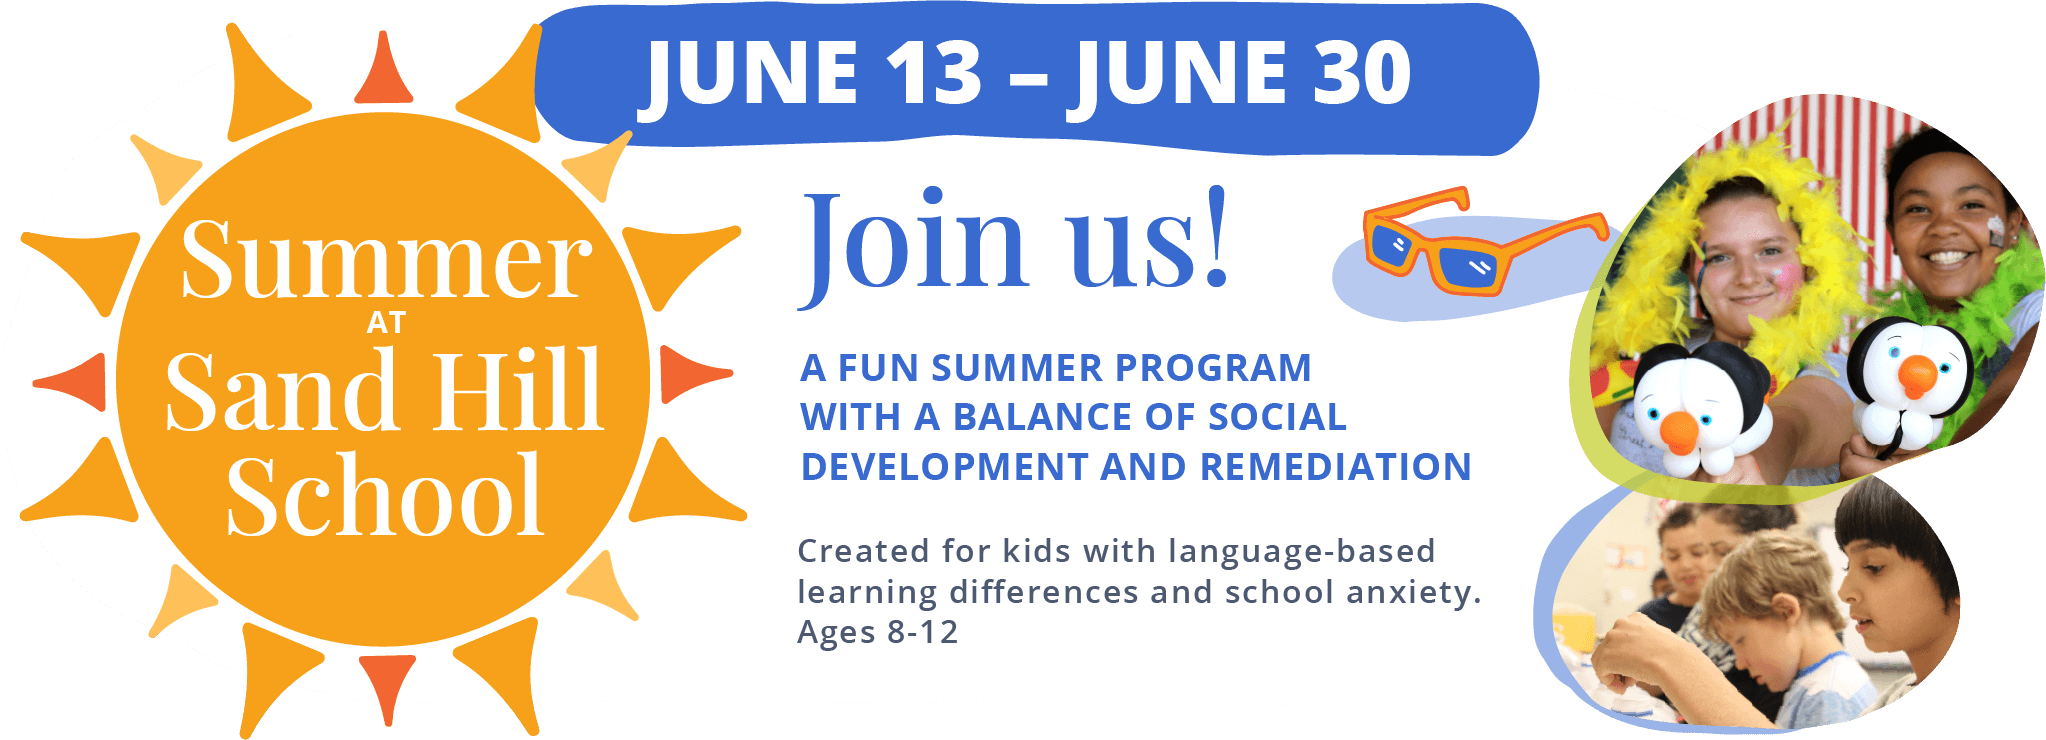 Summer at Sand Hill School. June 13 - June 30. Join us! A fun summer program with a balance of social development and remediation. Created for kids with language-based learning differences and school anxiety. Ages 8-12